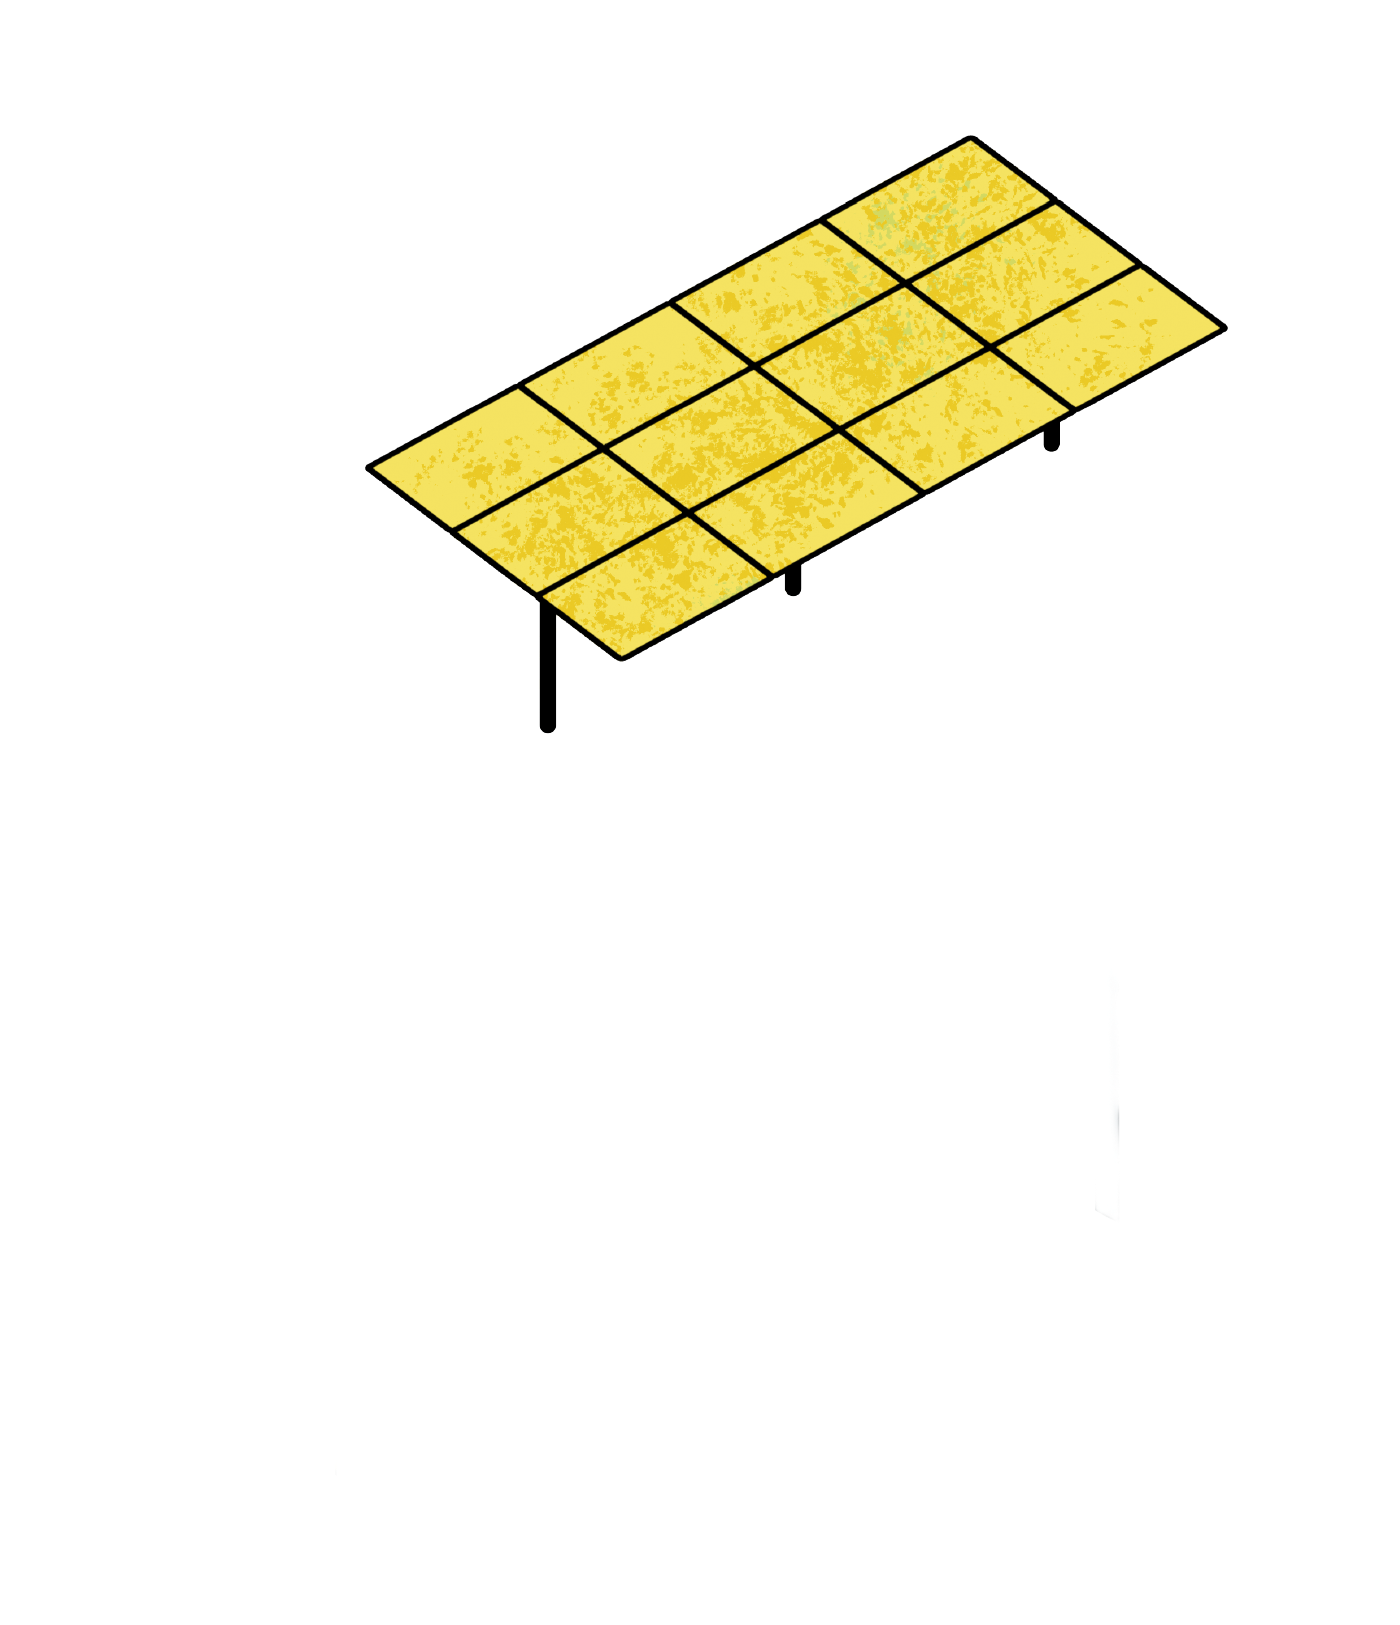 solar panel on the roof of the hut